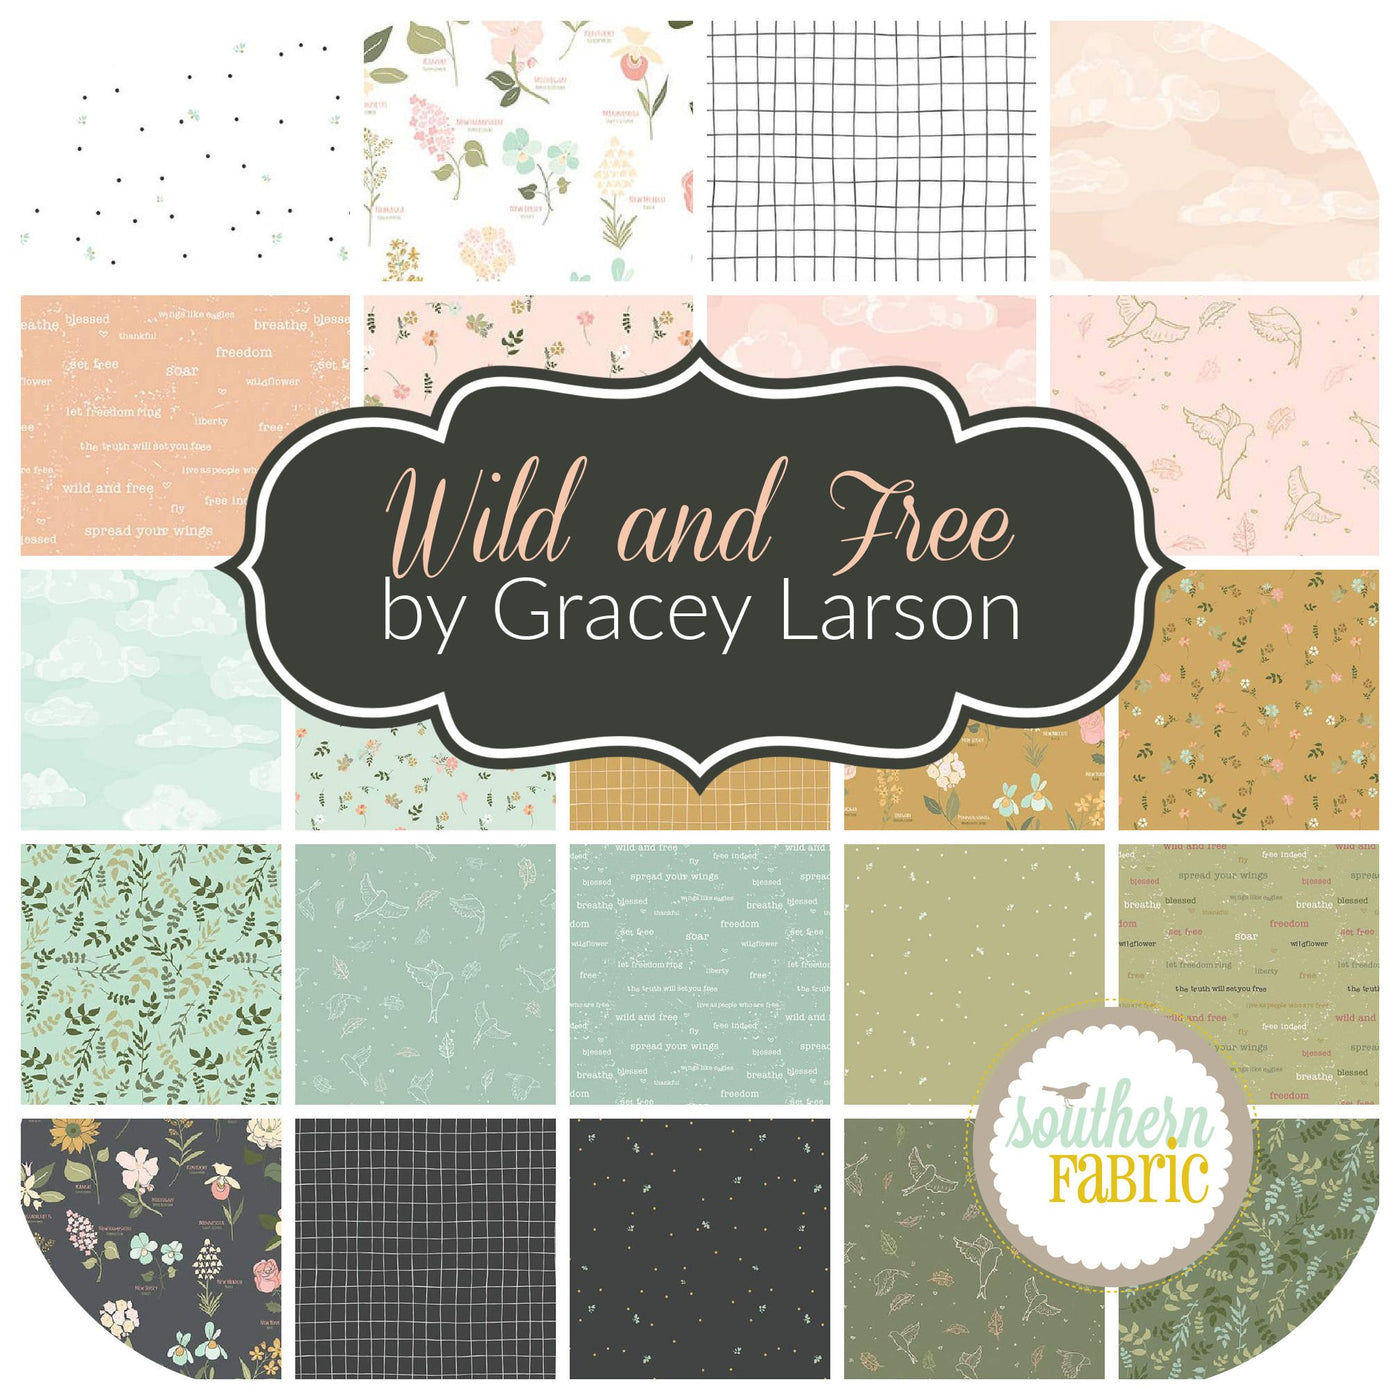 Wild and Free Fat Quarter Bundle (24 pcs) by Gracey Larson for Riley Blake (FQ-12930-24)